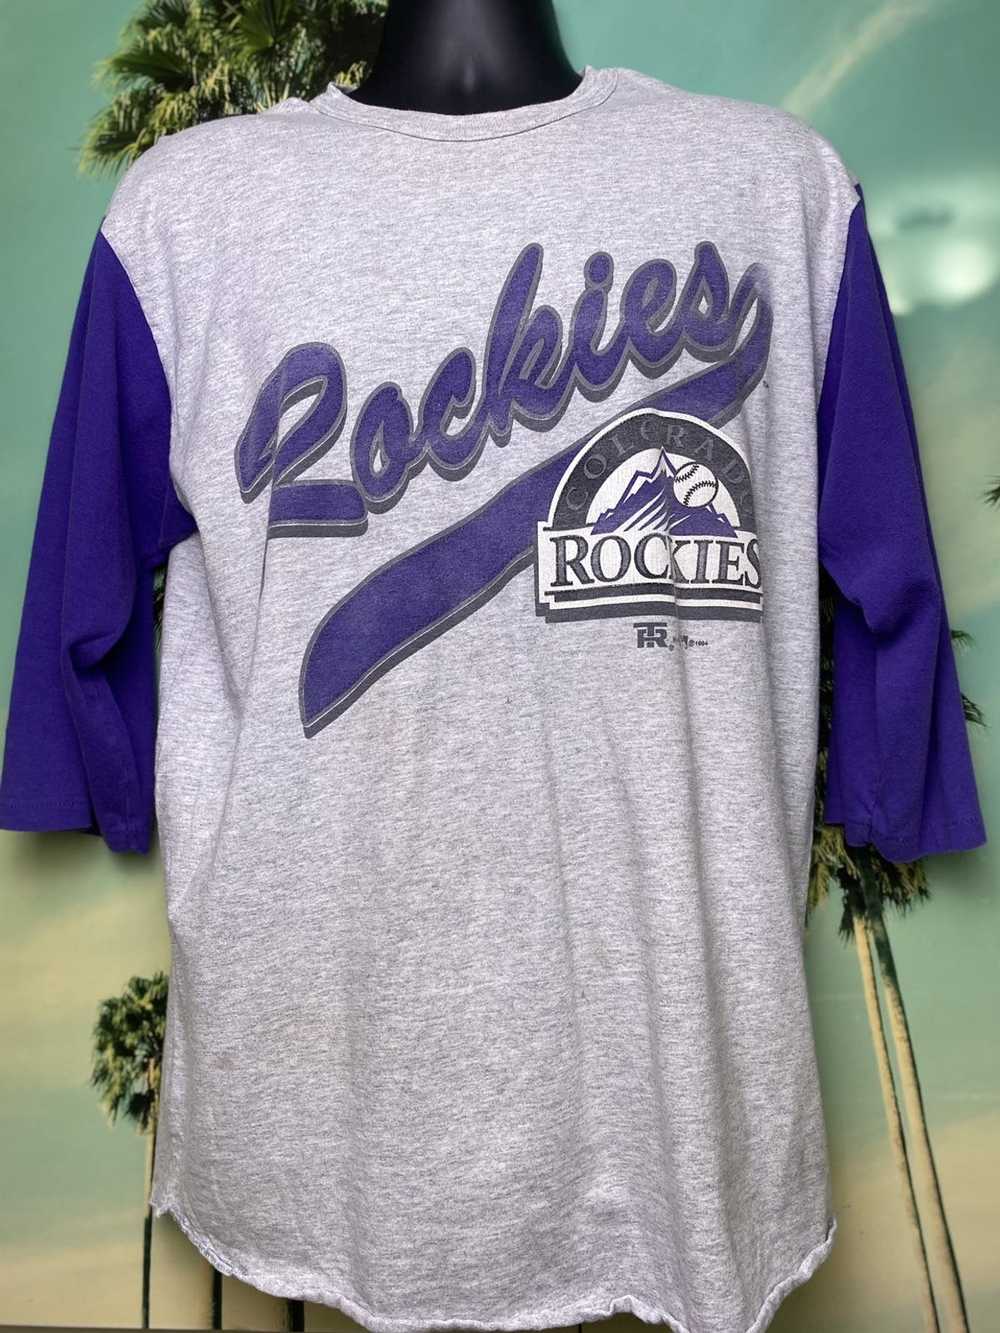 Colorado Rockies '93 T-Shirt from Homage. | Royal Purple | Vintage Apparel from Homage.